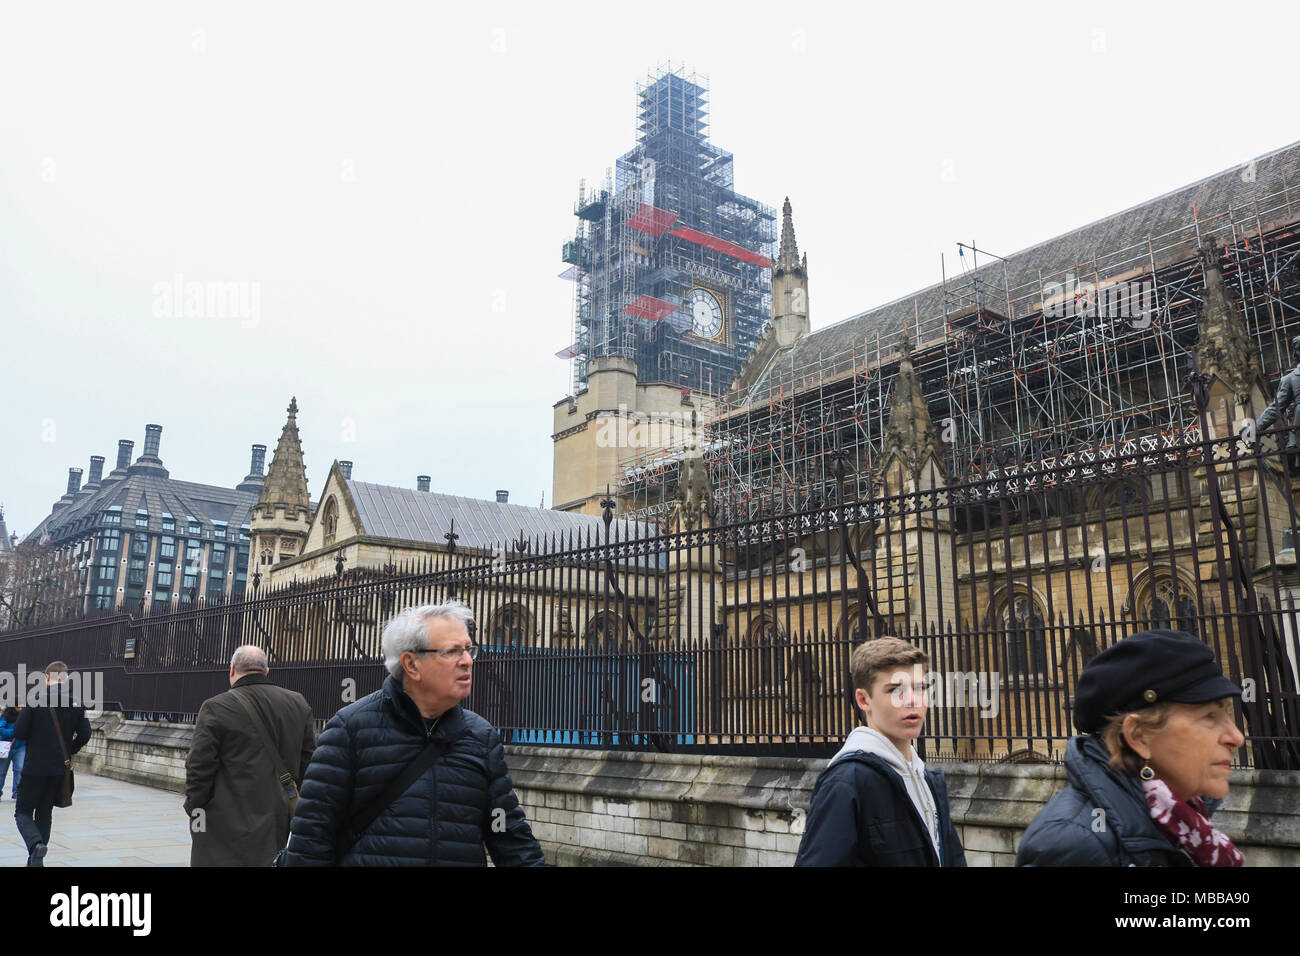 London UK. 10th April 2018. The hands which mark the time at the Big Ben clock tower have been removed as part of the Westminster renovation programme Credit: amer ghazzal/Alamy Live News Stock Photo